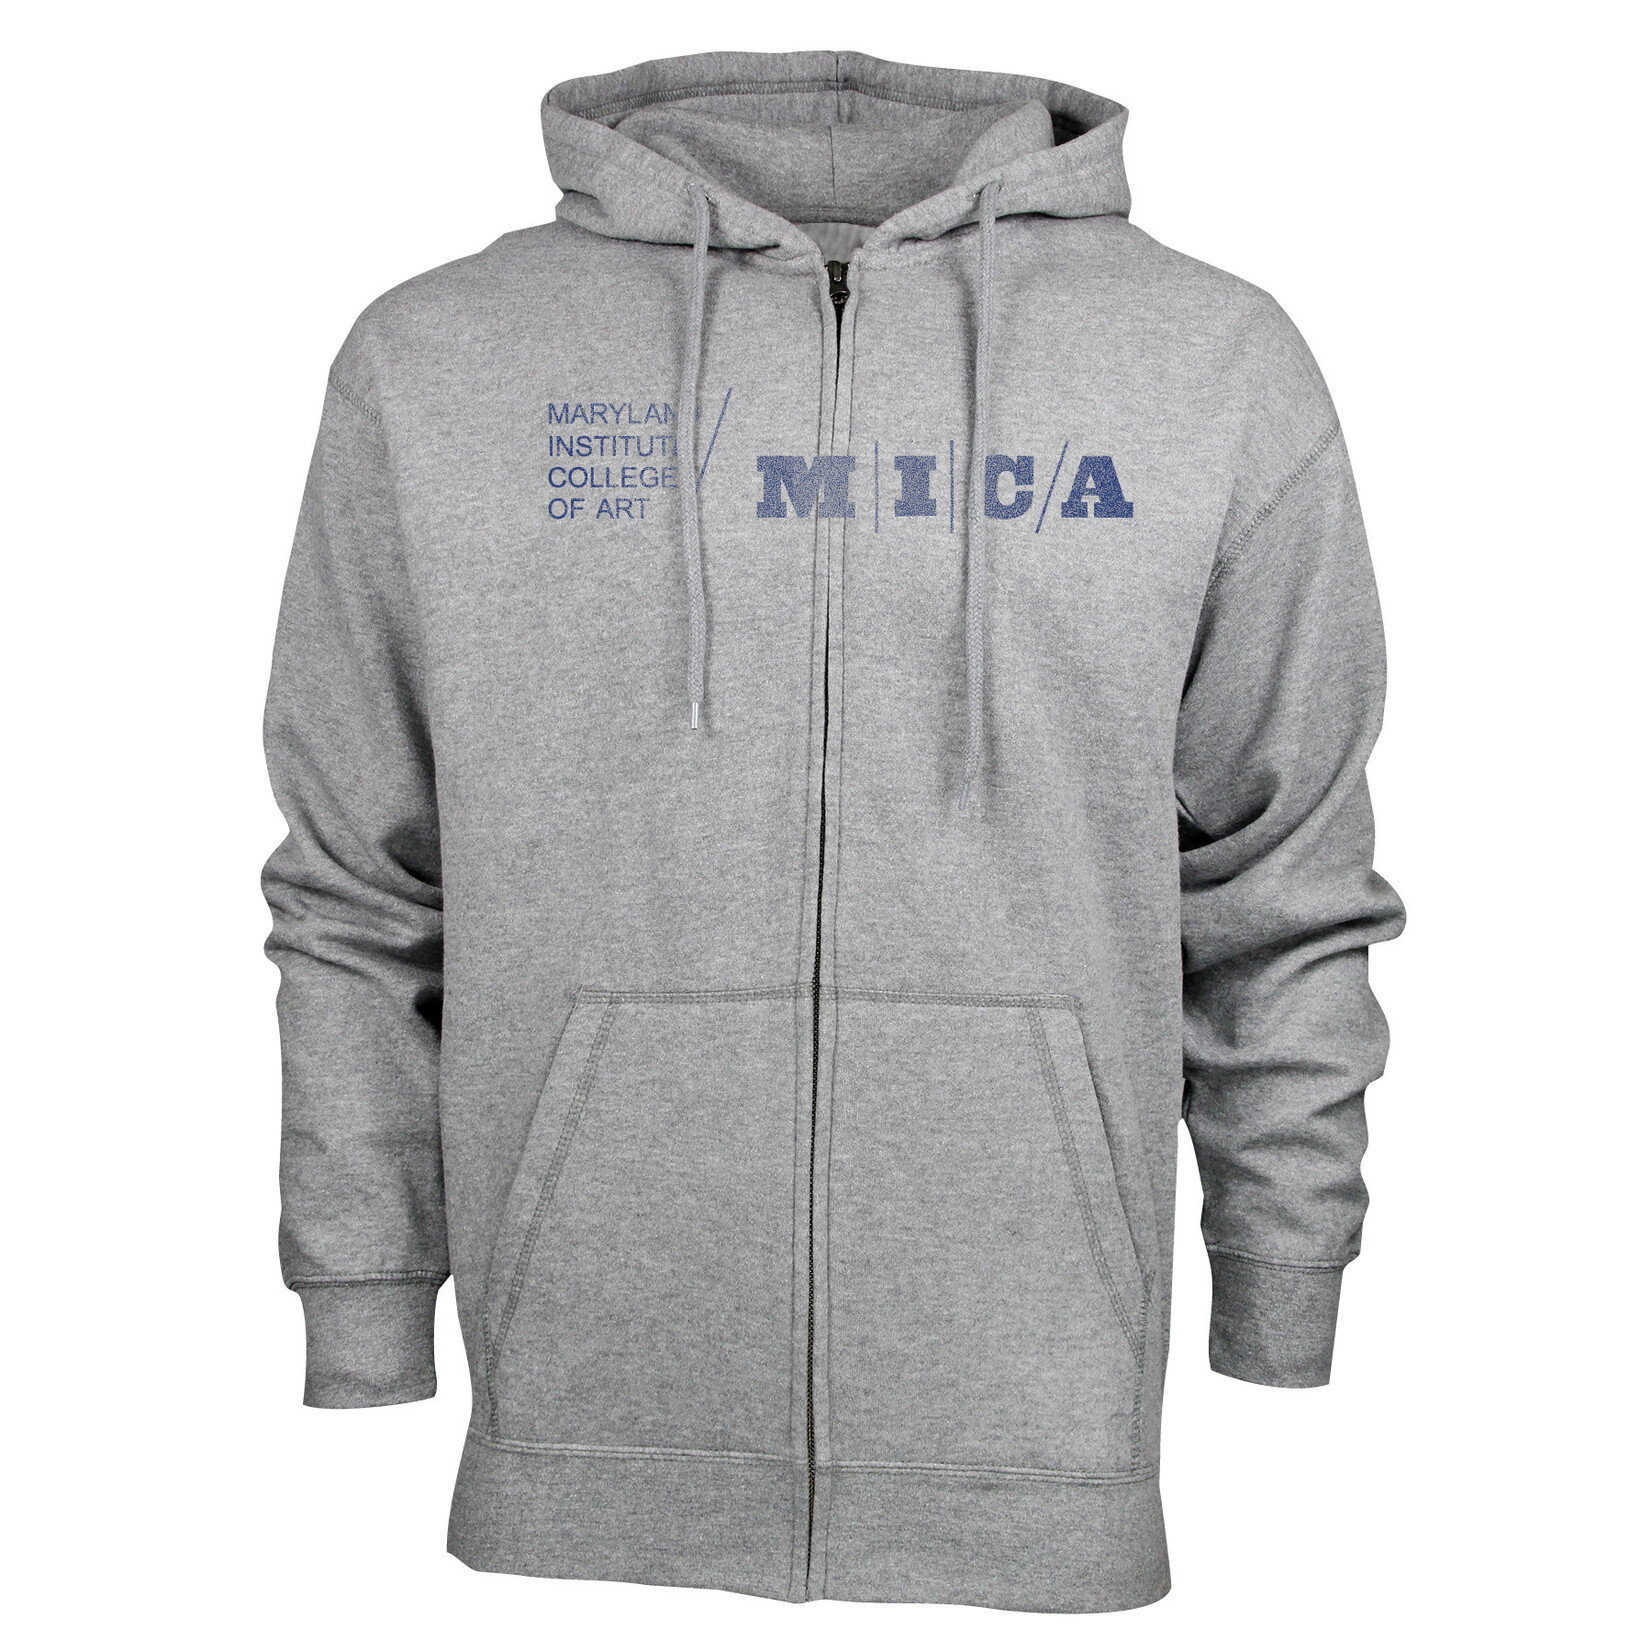 Ouray MICA Zip Hoodie distressed Logo